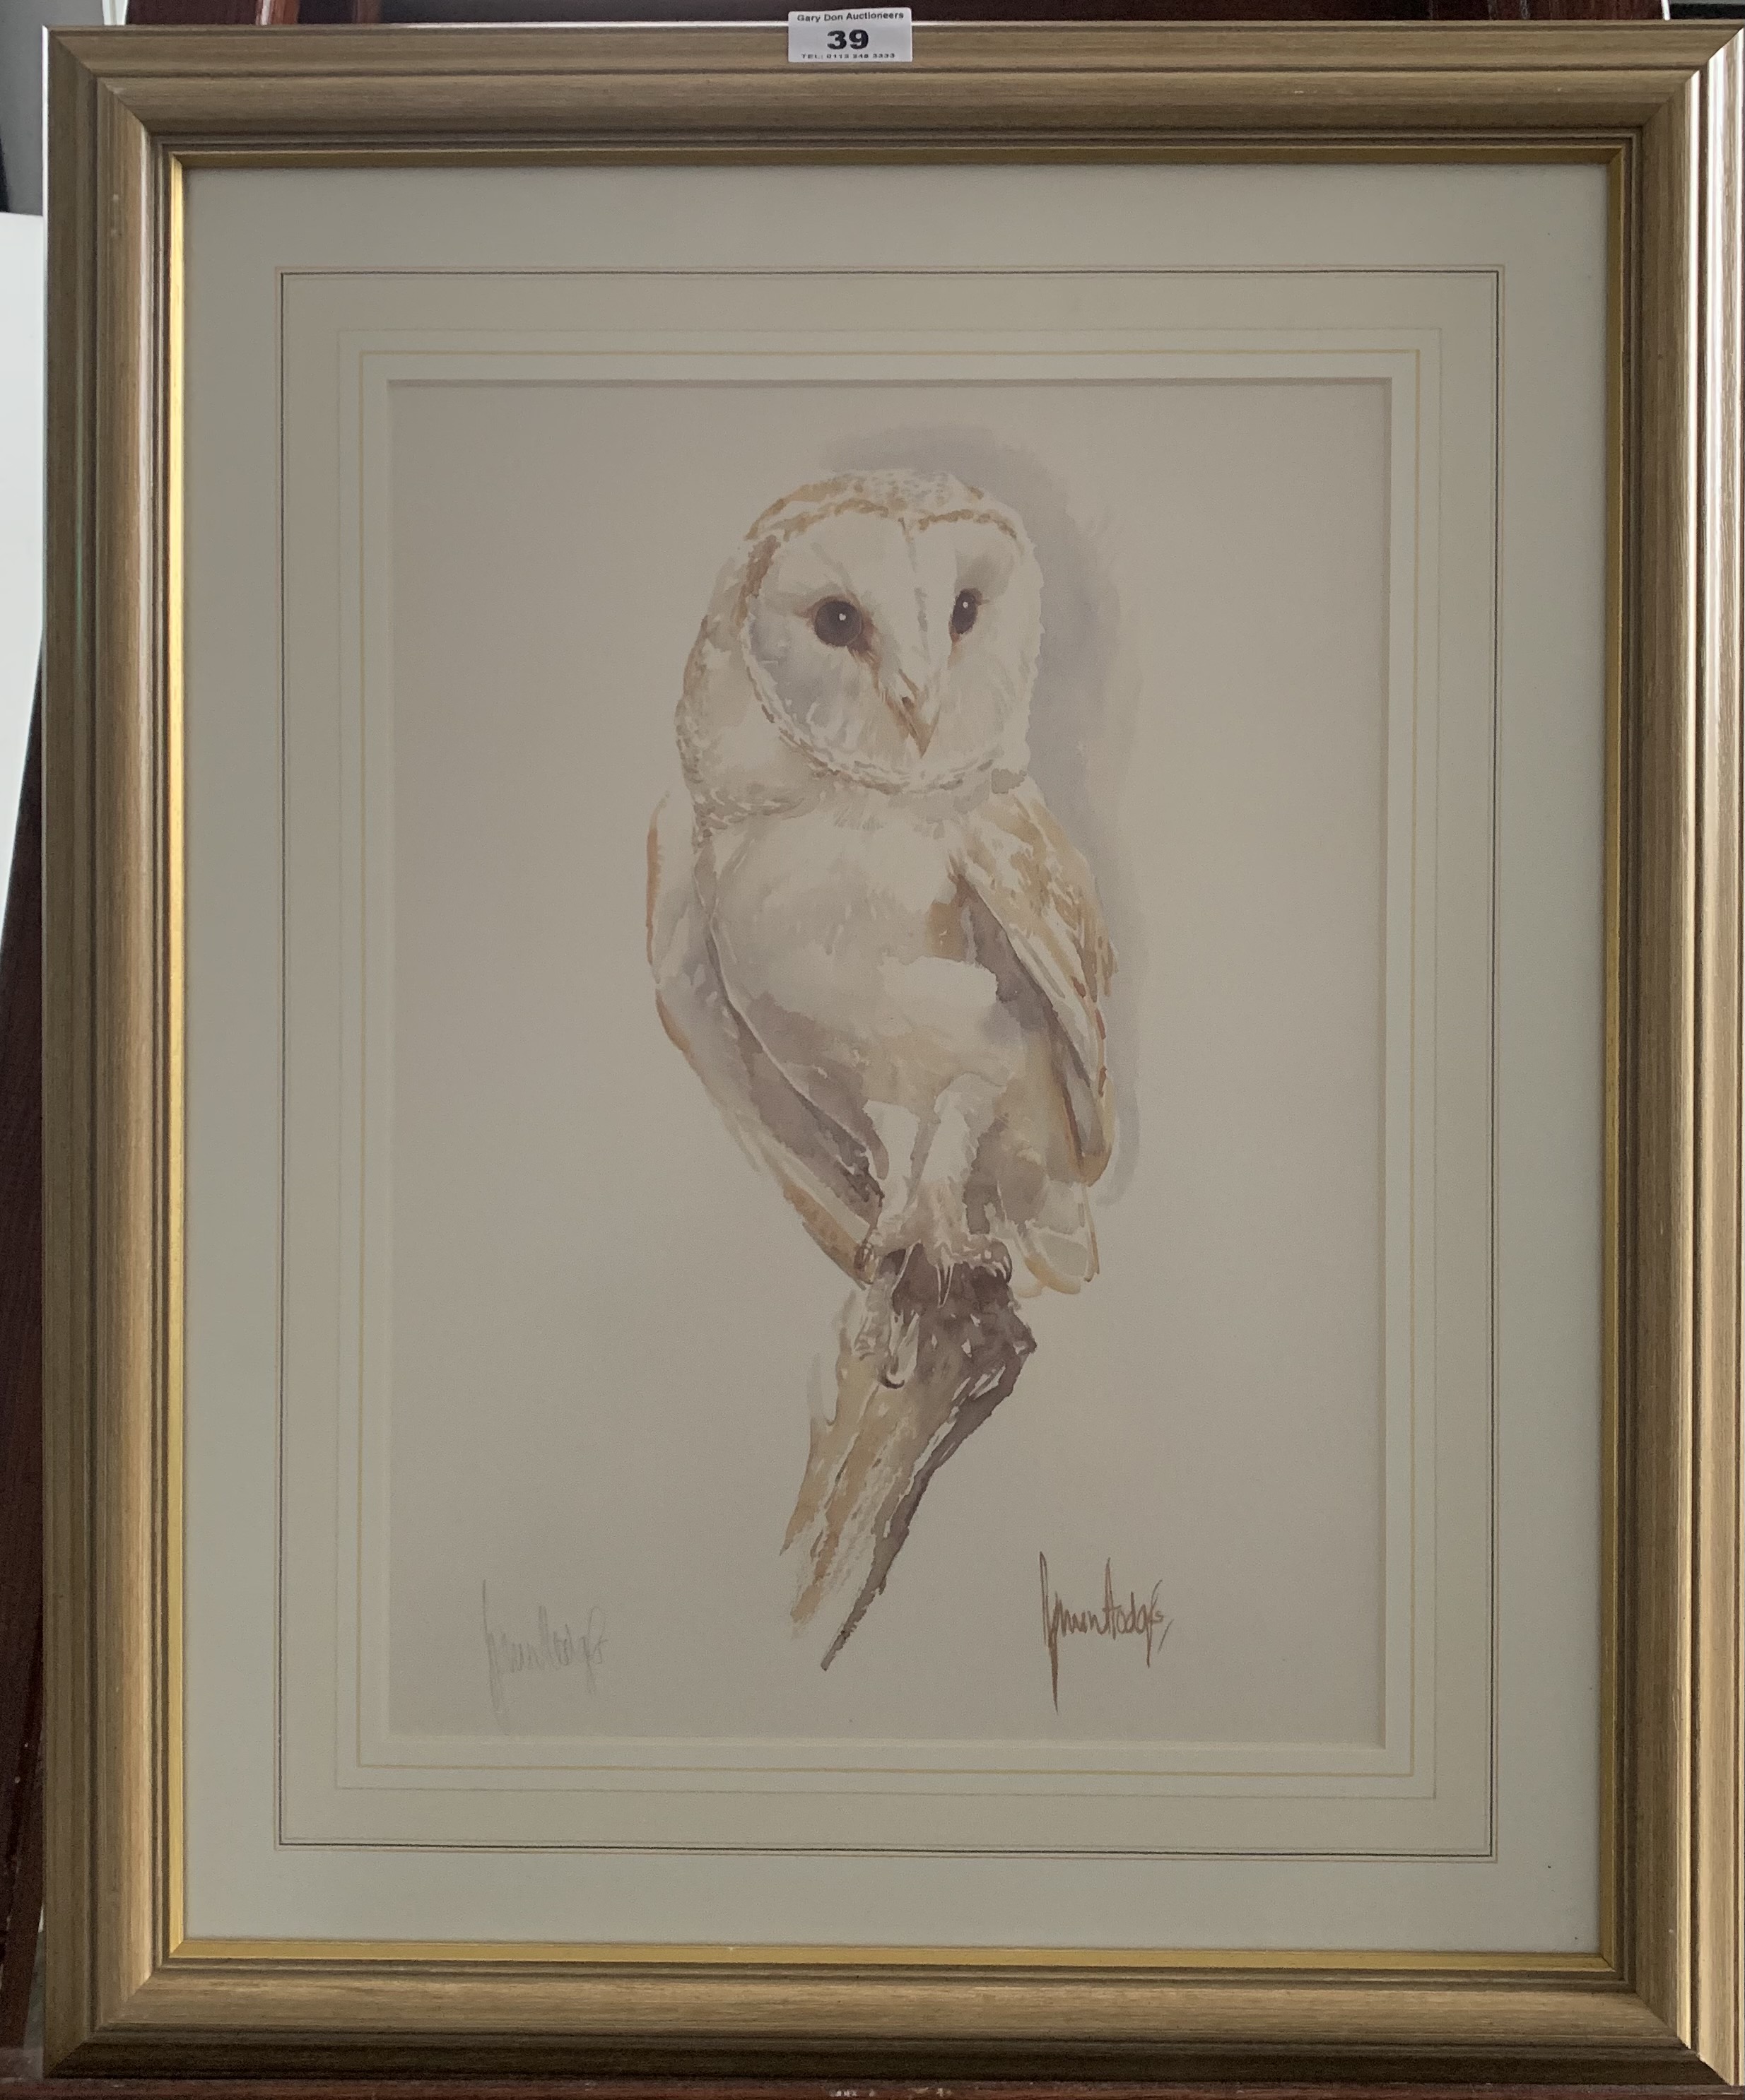 Print of barn owl by James Hodges. Signed in pencil by artist. 11” x 15”, frame 19.5” x 23.5”.